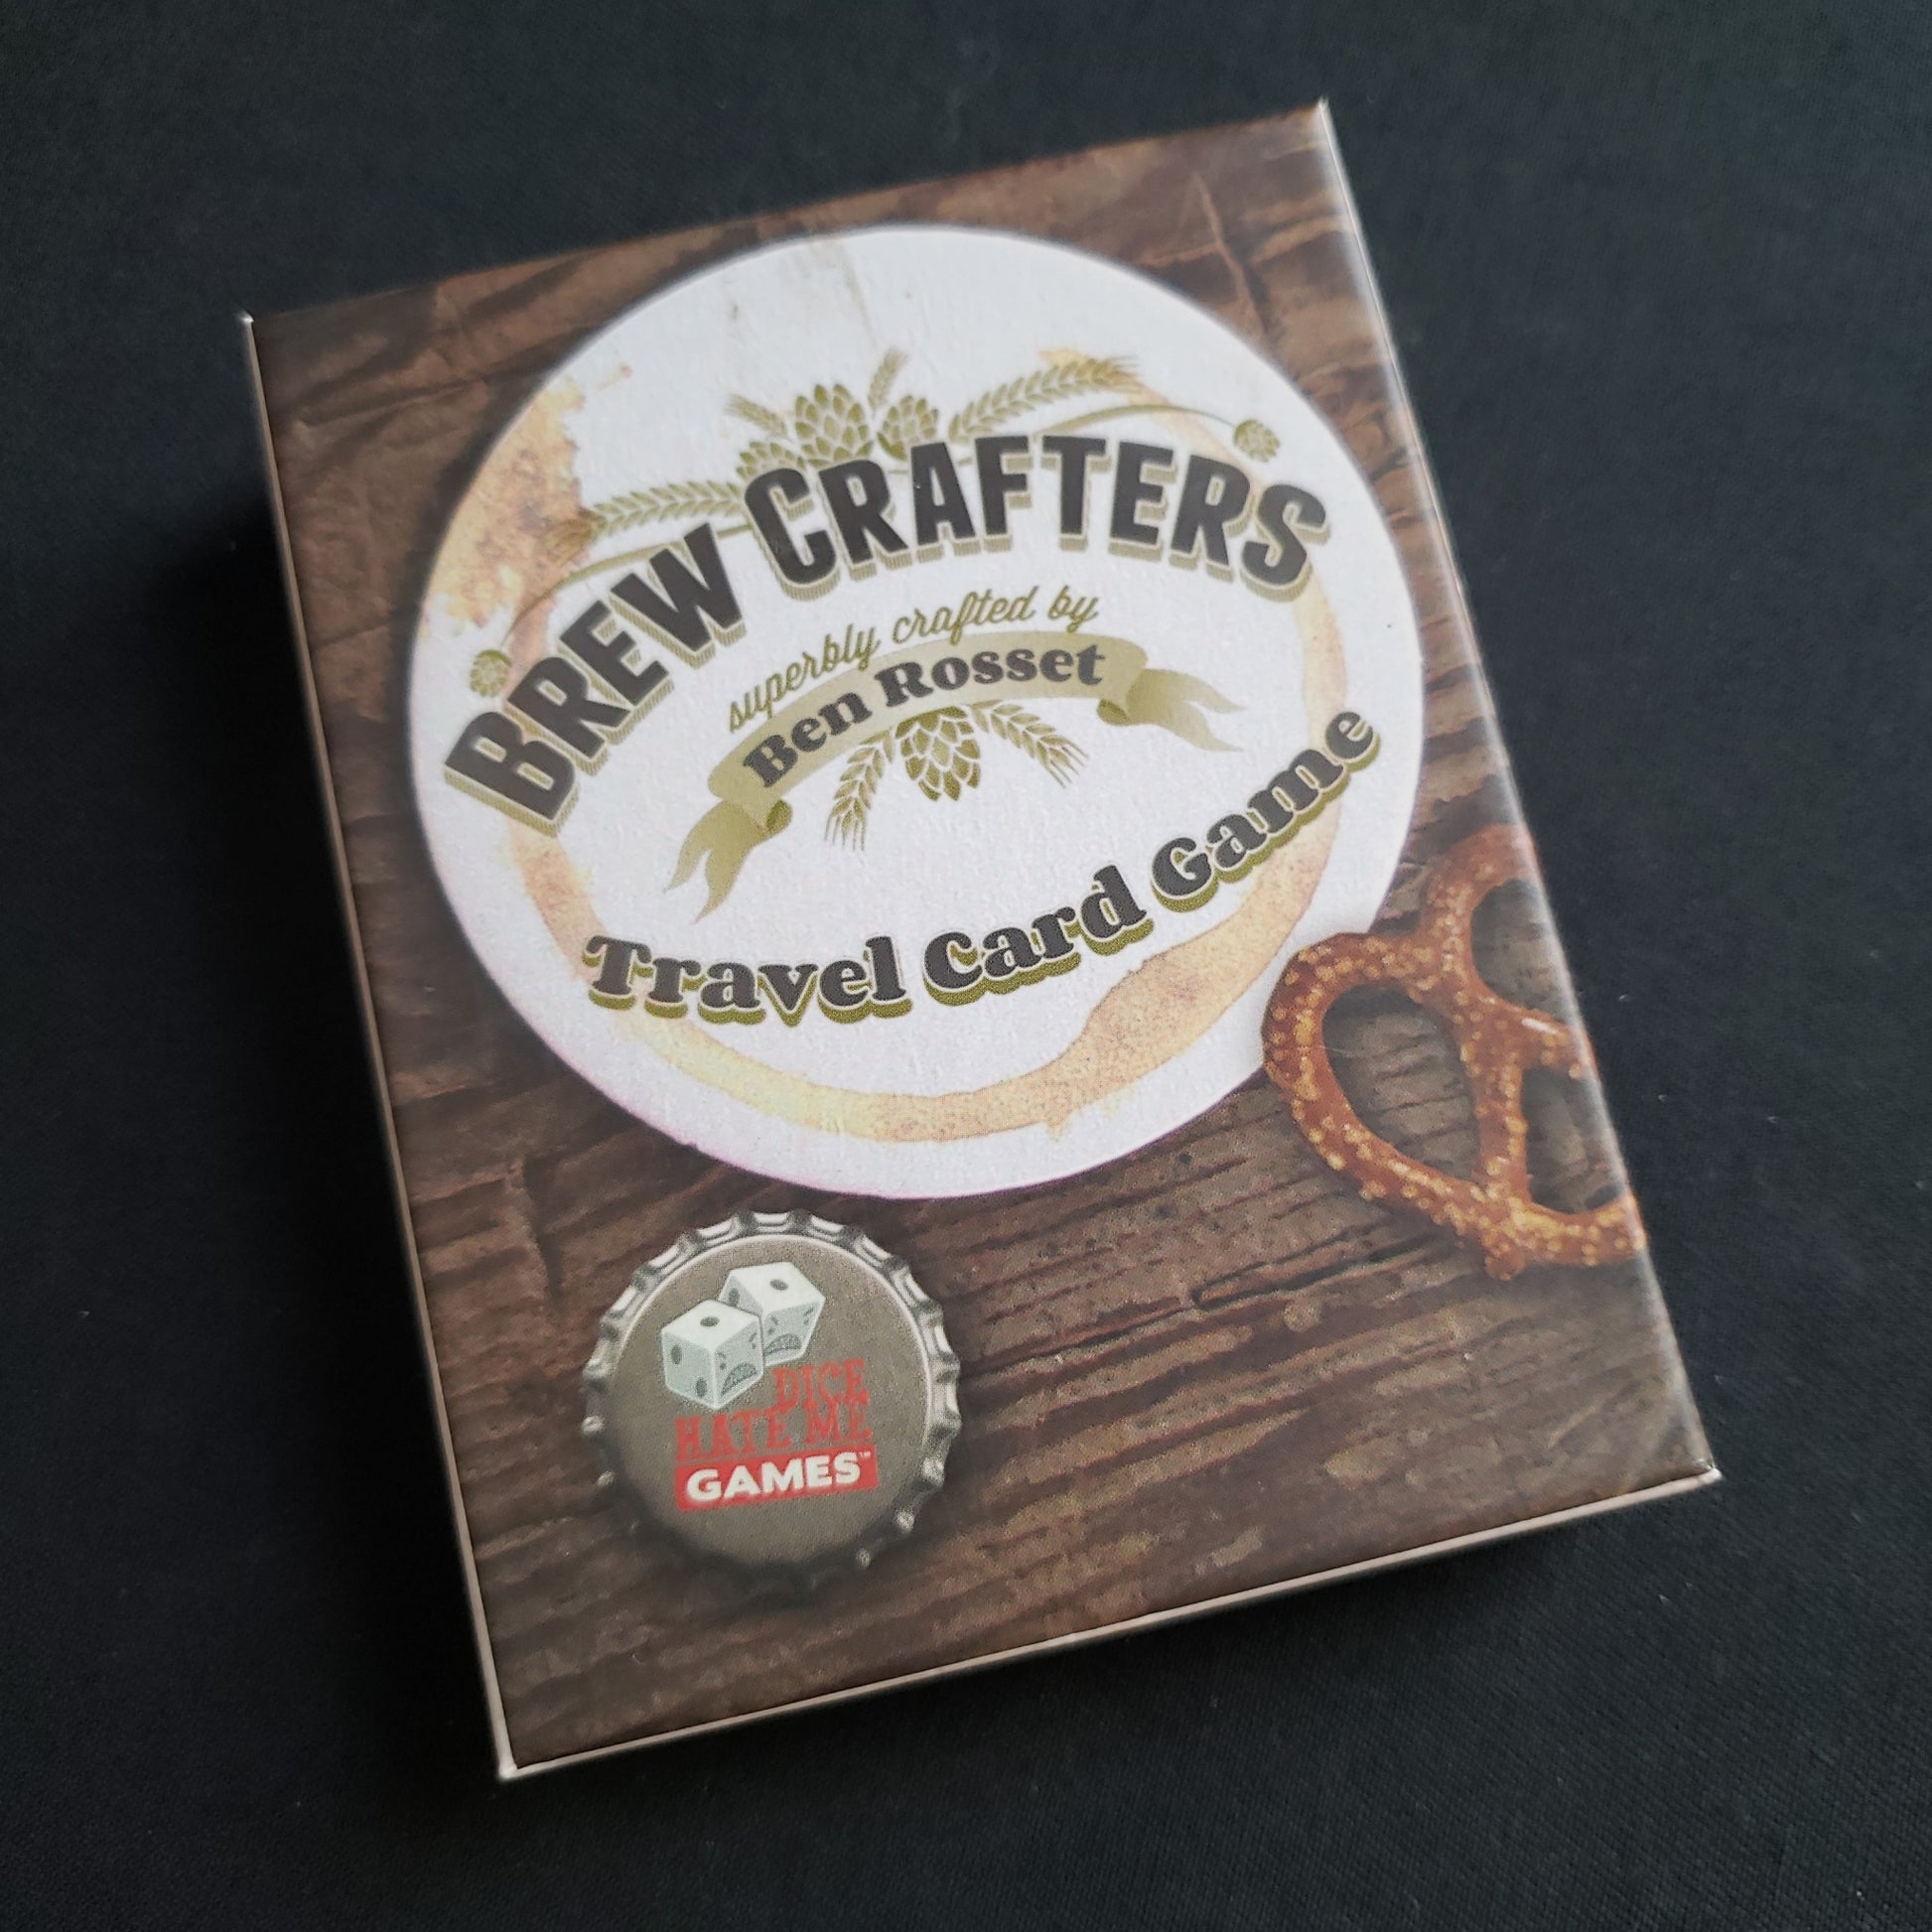 Image shows the front cover of the box of the Brew Crafters: Travel Card Game